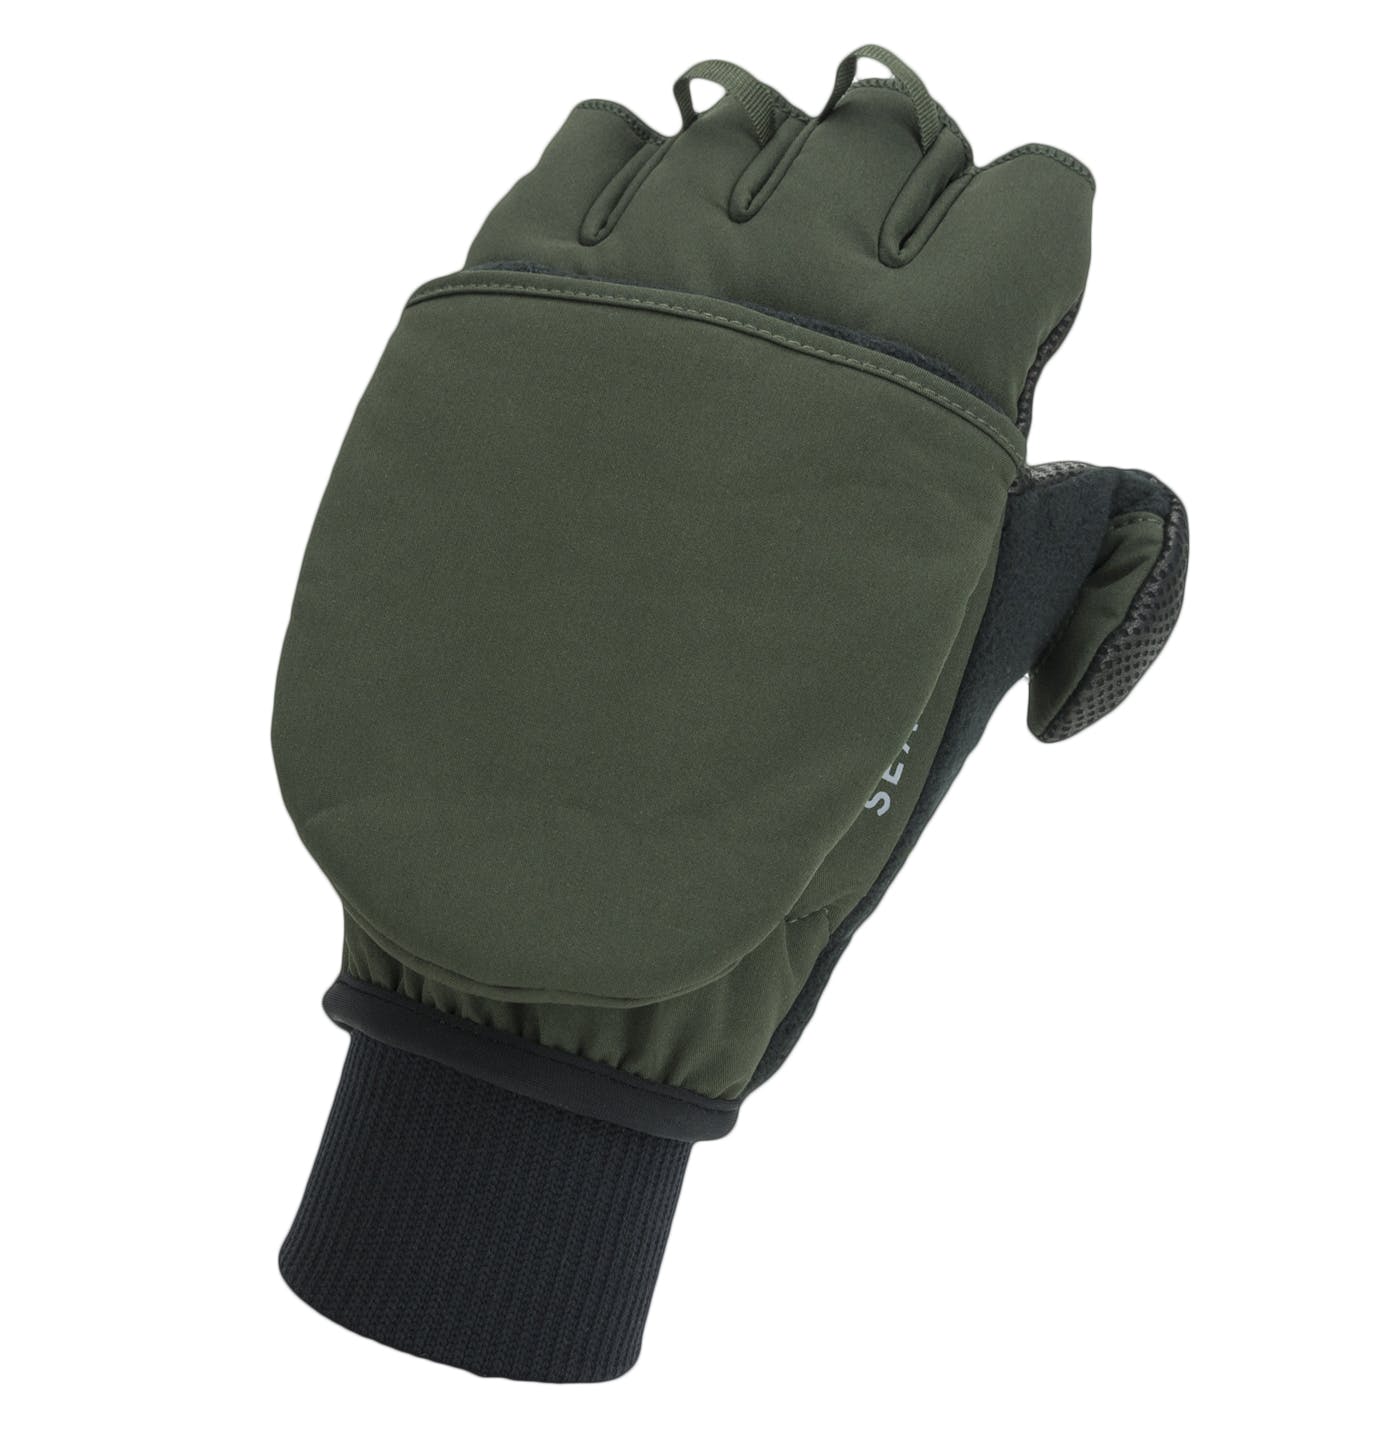  CLAM Edge Glove - Small, Windproof, Waterproof and Breathable  : Sports & Outdoors